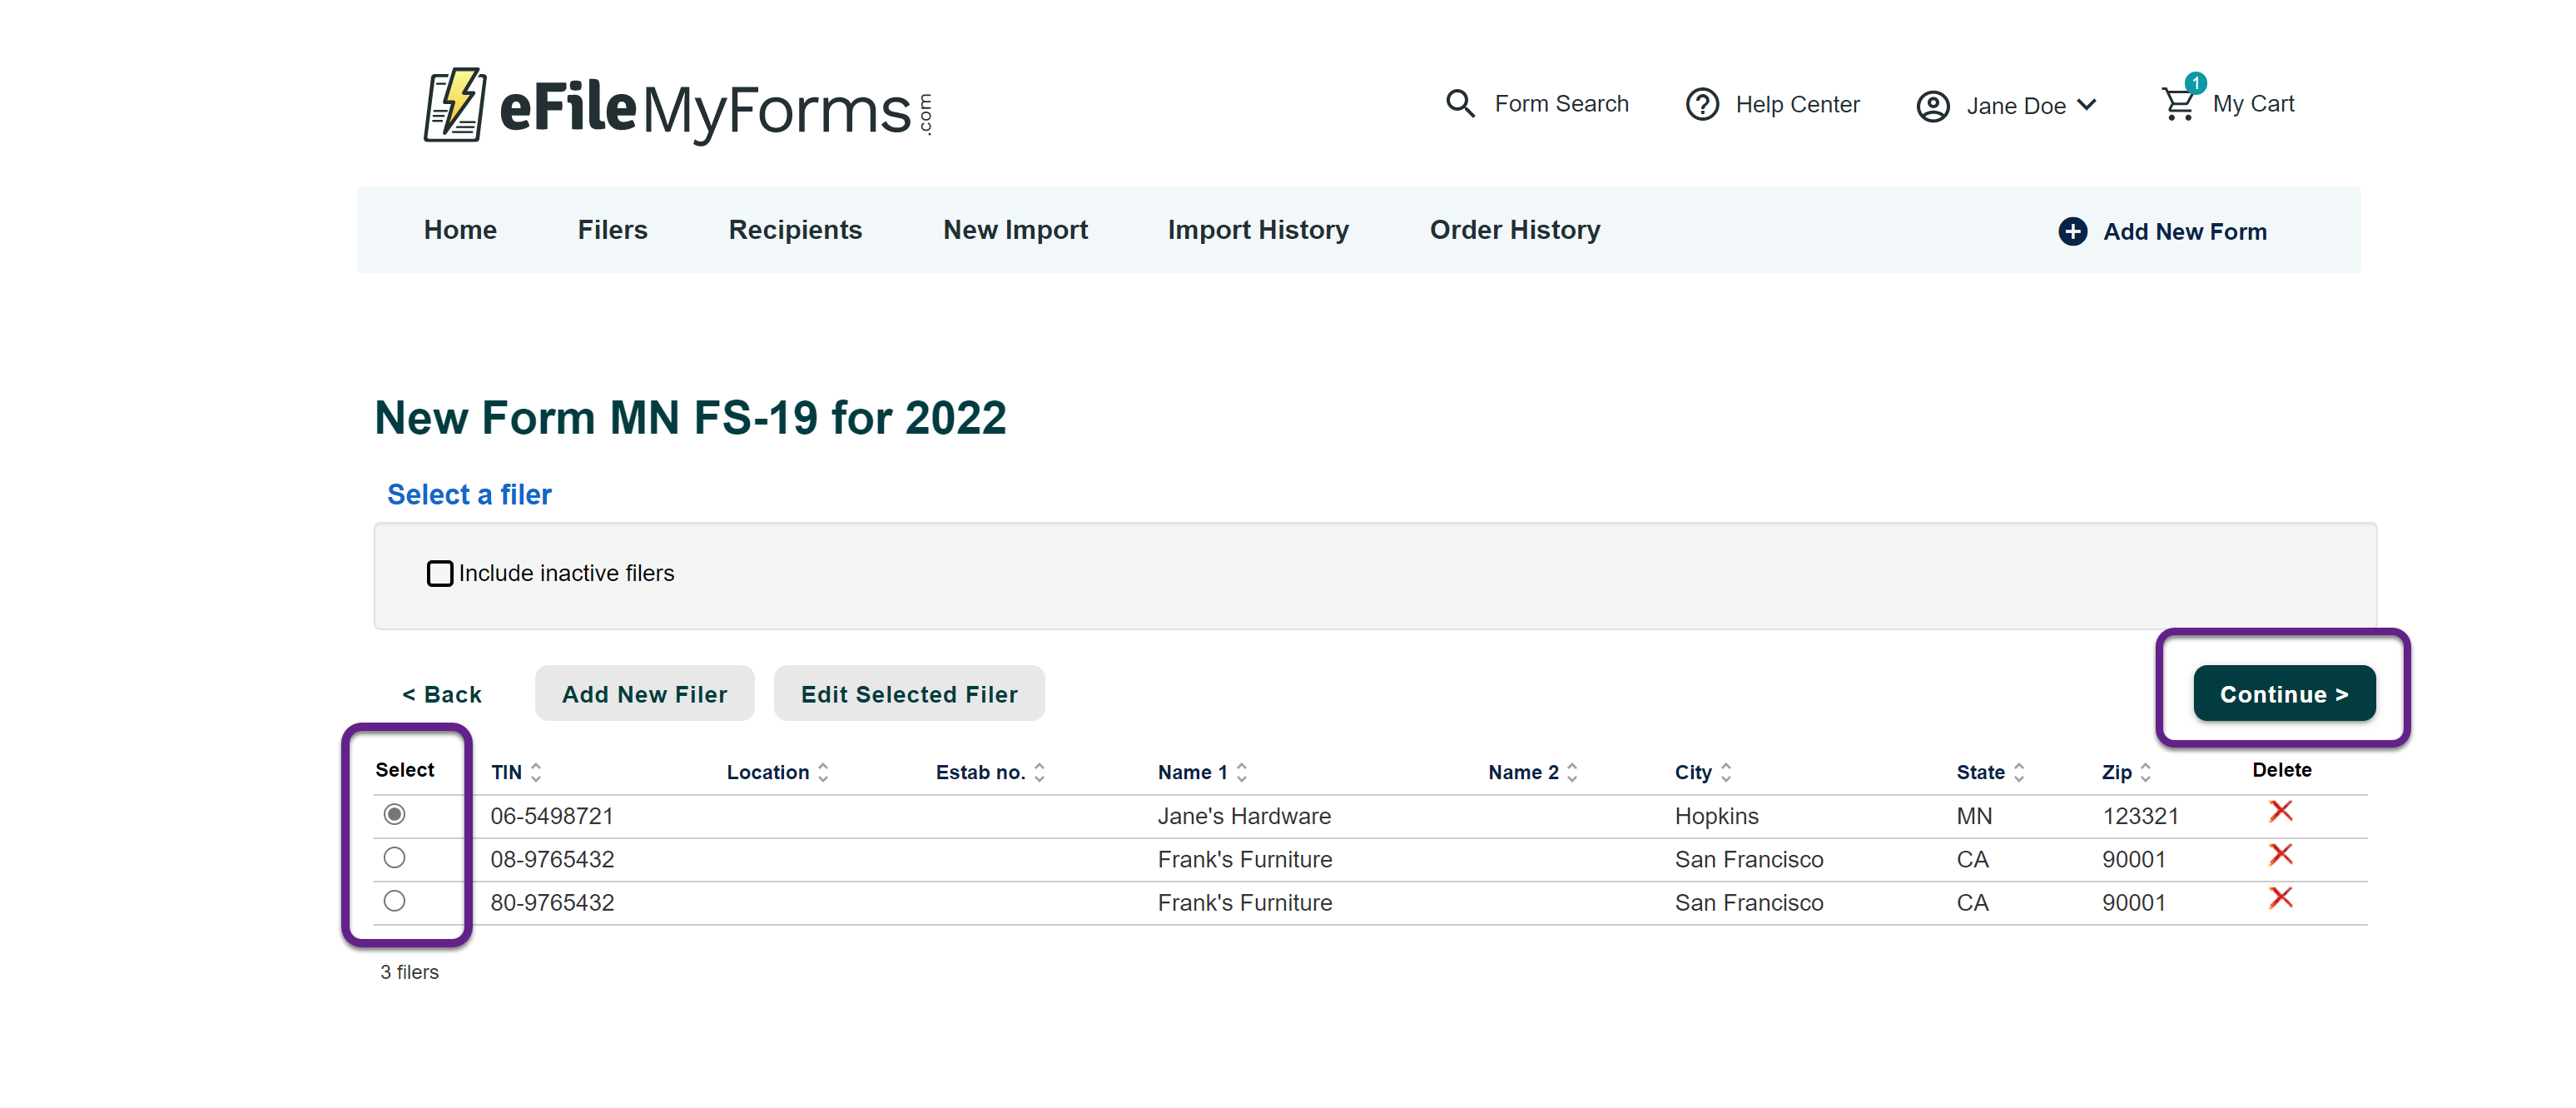 Image of the New Form page with a callout on the filer Select column.